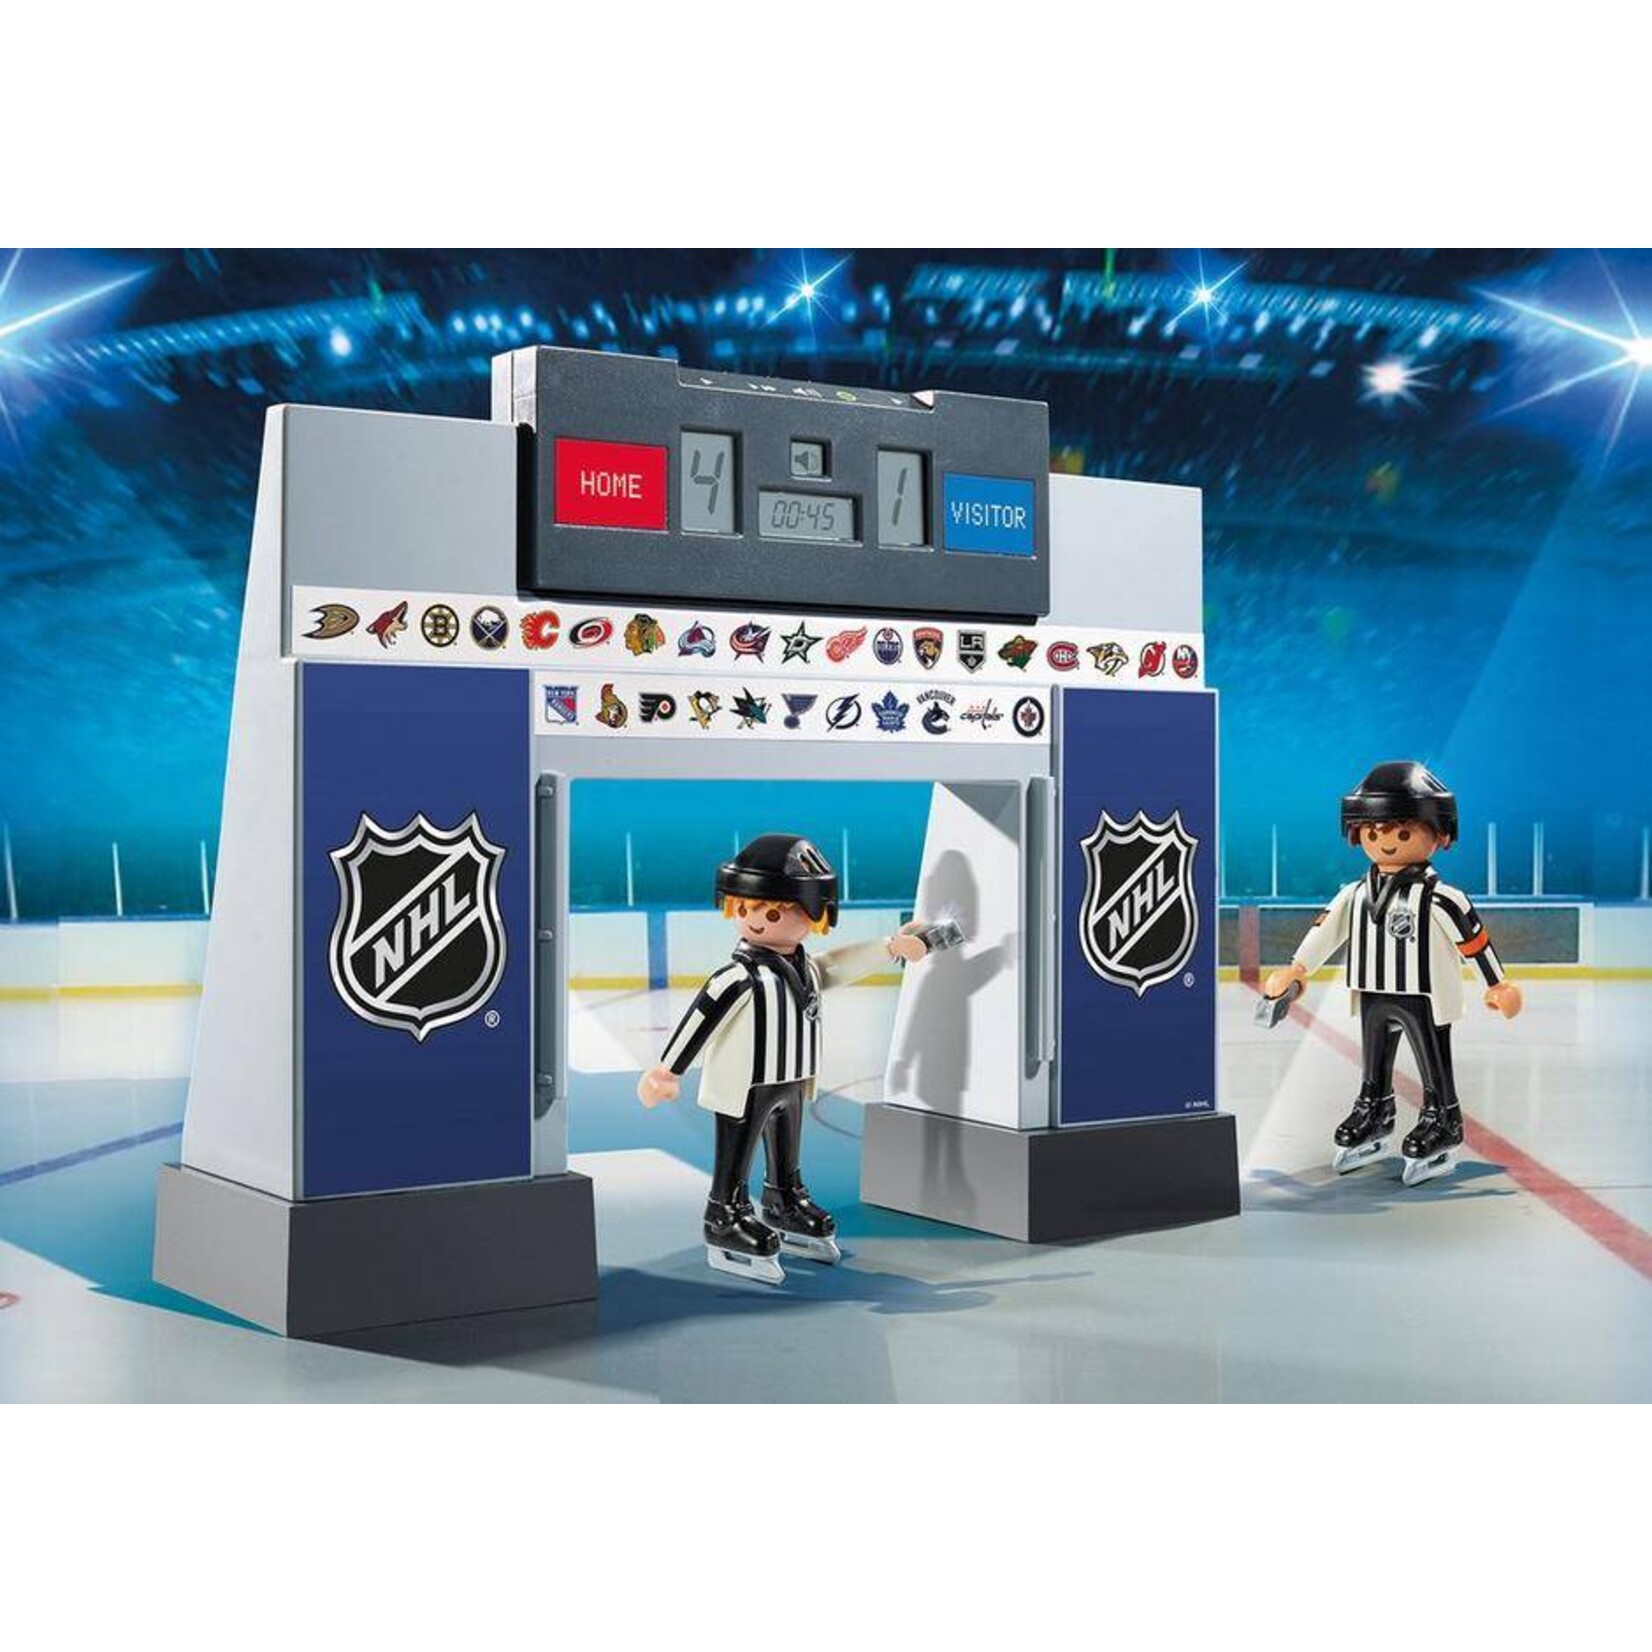 Playmobil NHL Score Clock with Referees